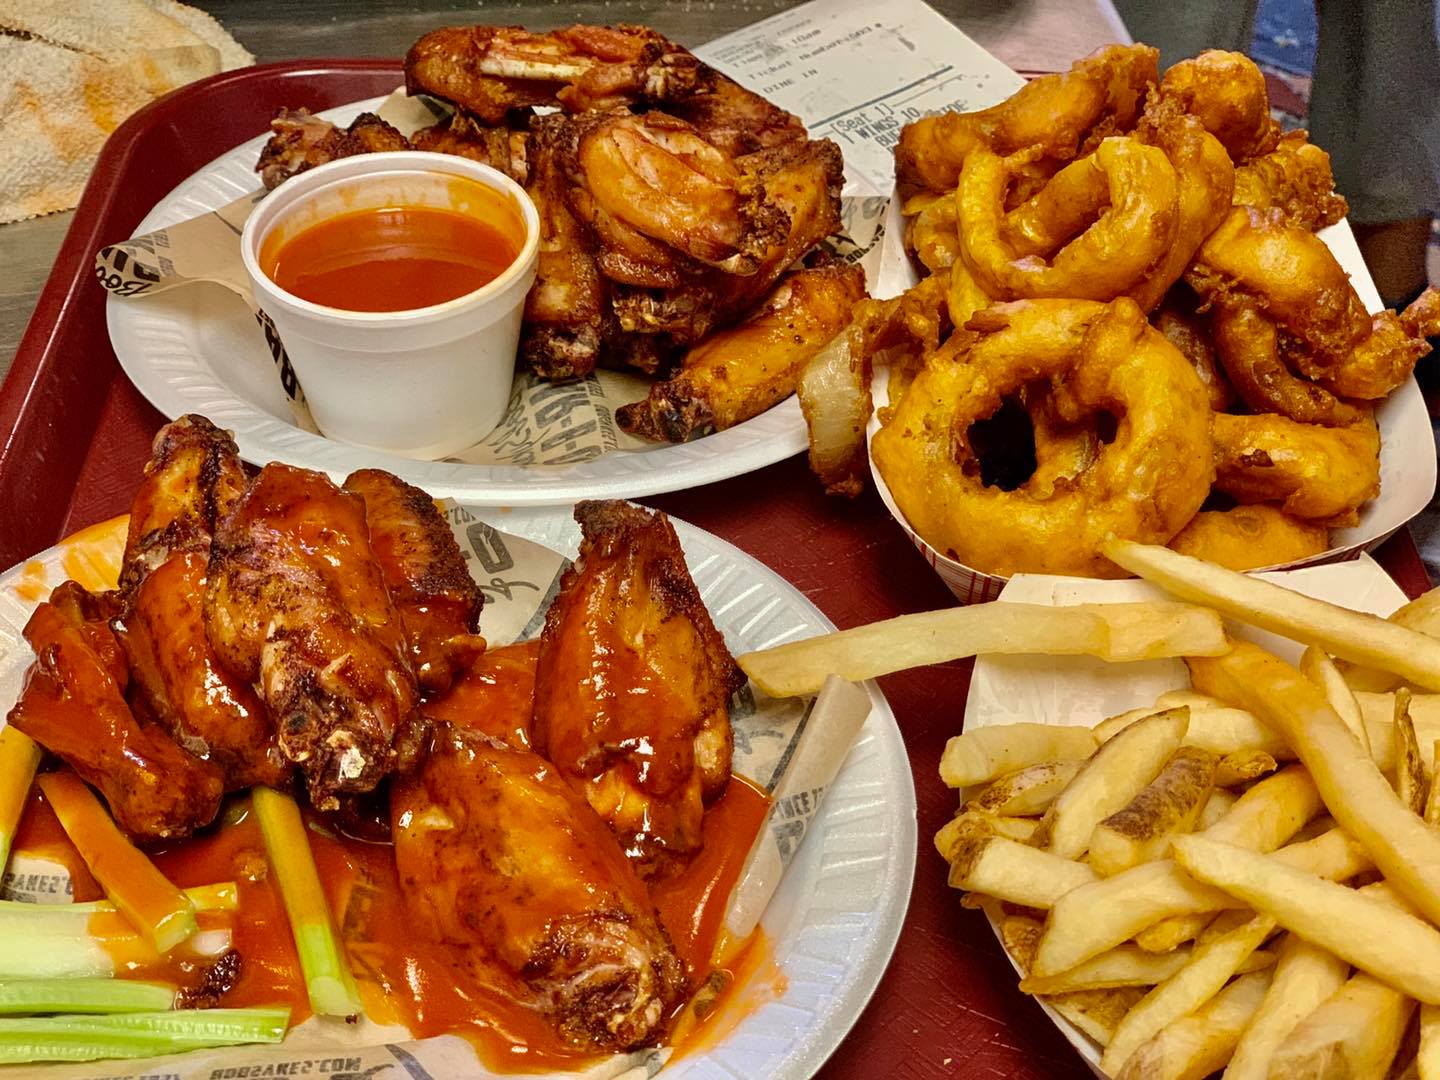 Pick up your Labor Day meal at these 5 great spots—PLUS, can’t-miss deals